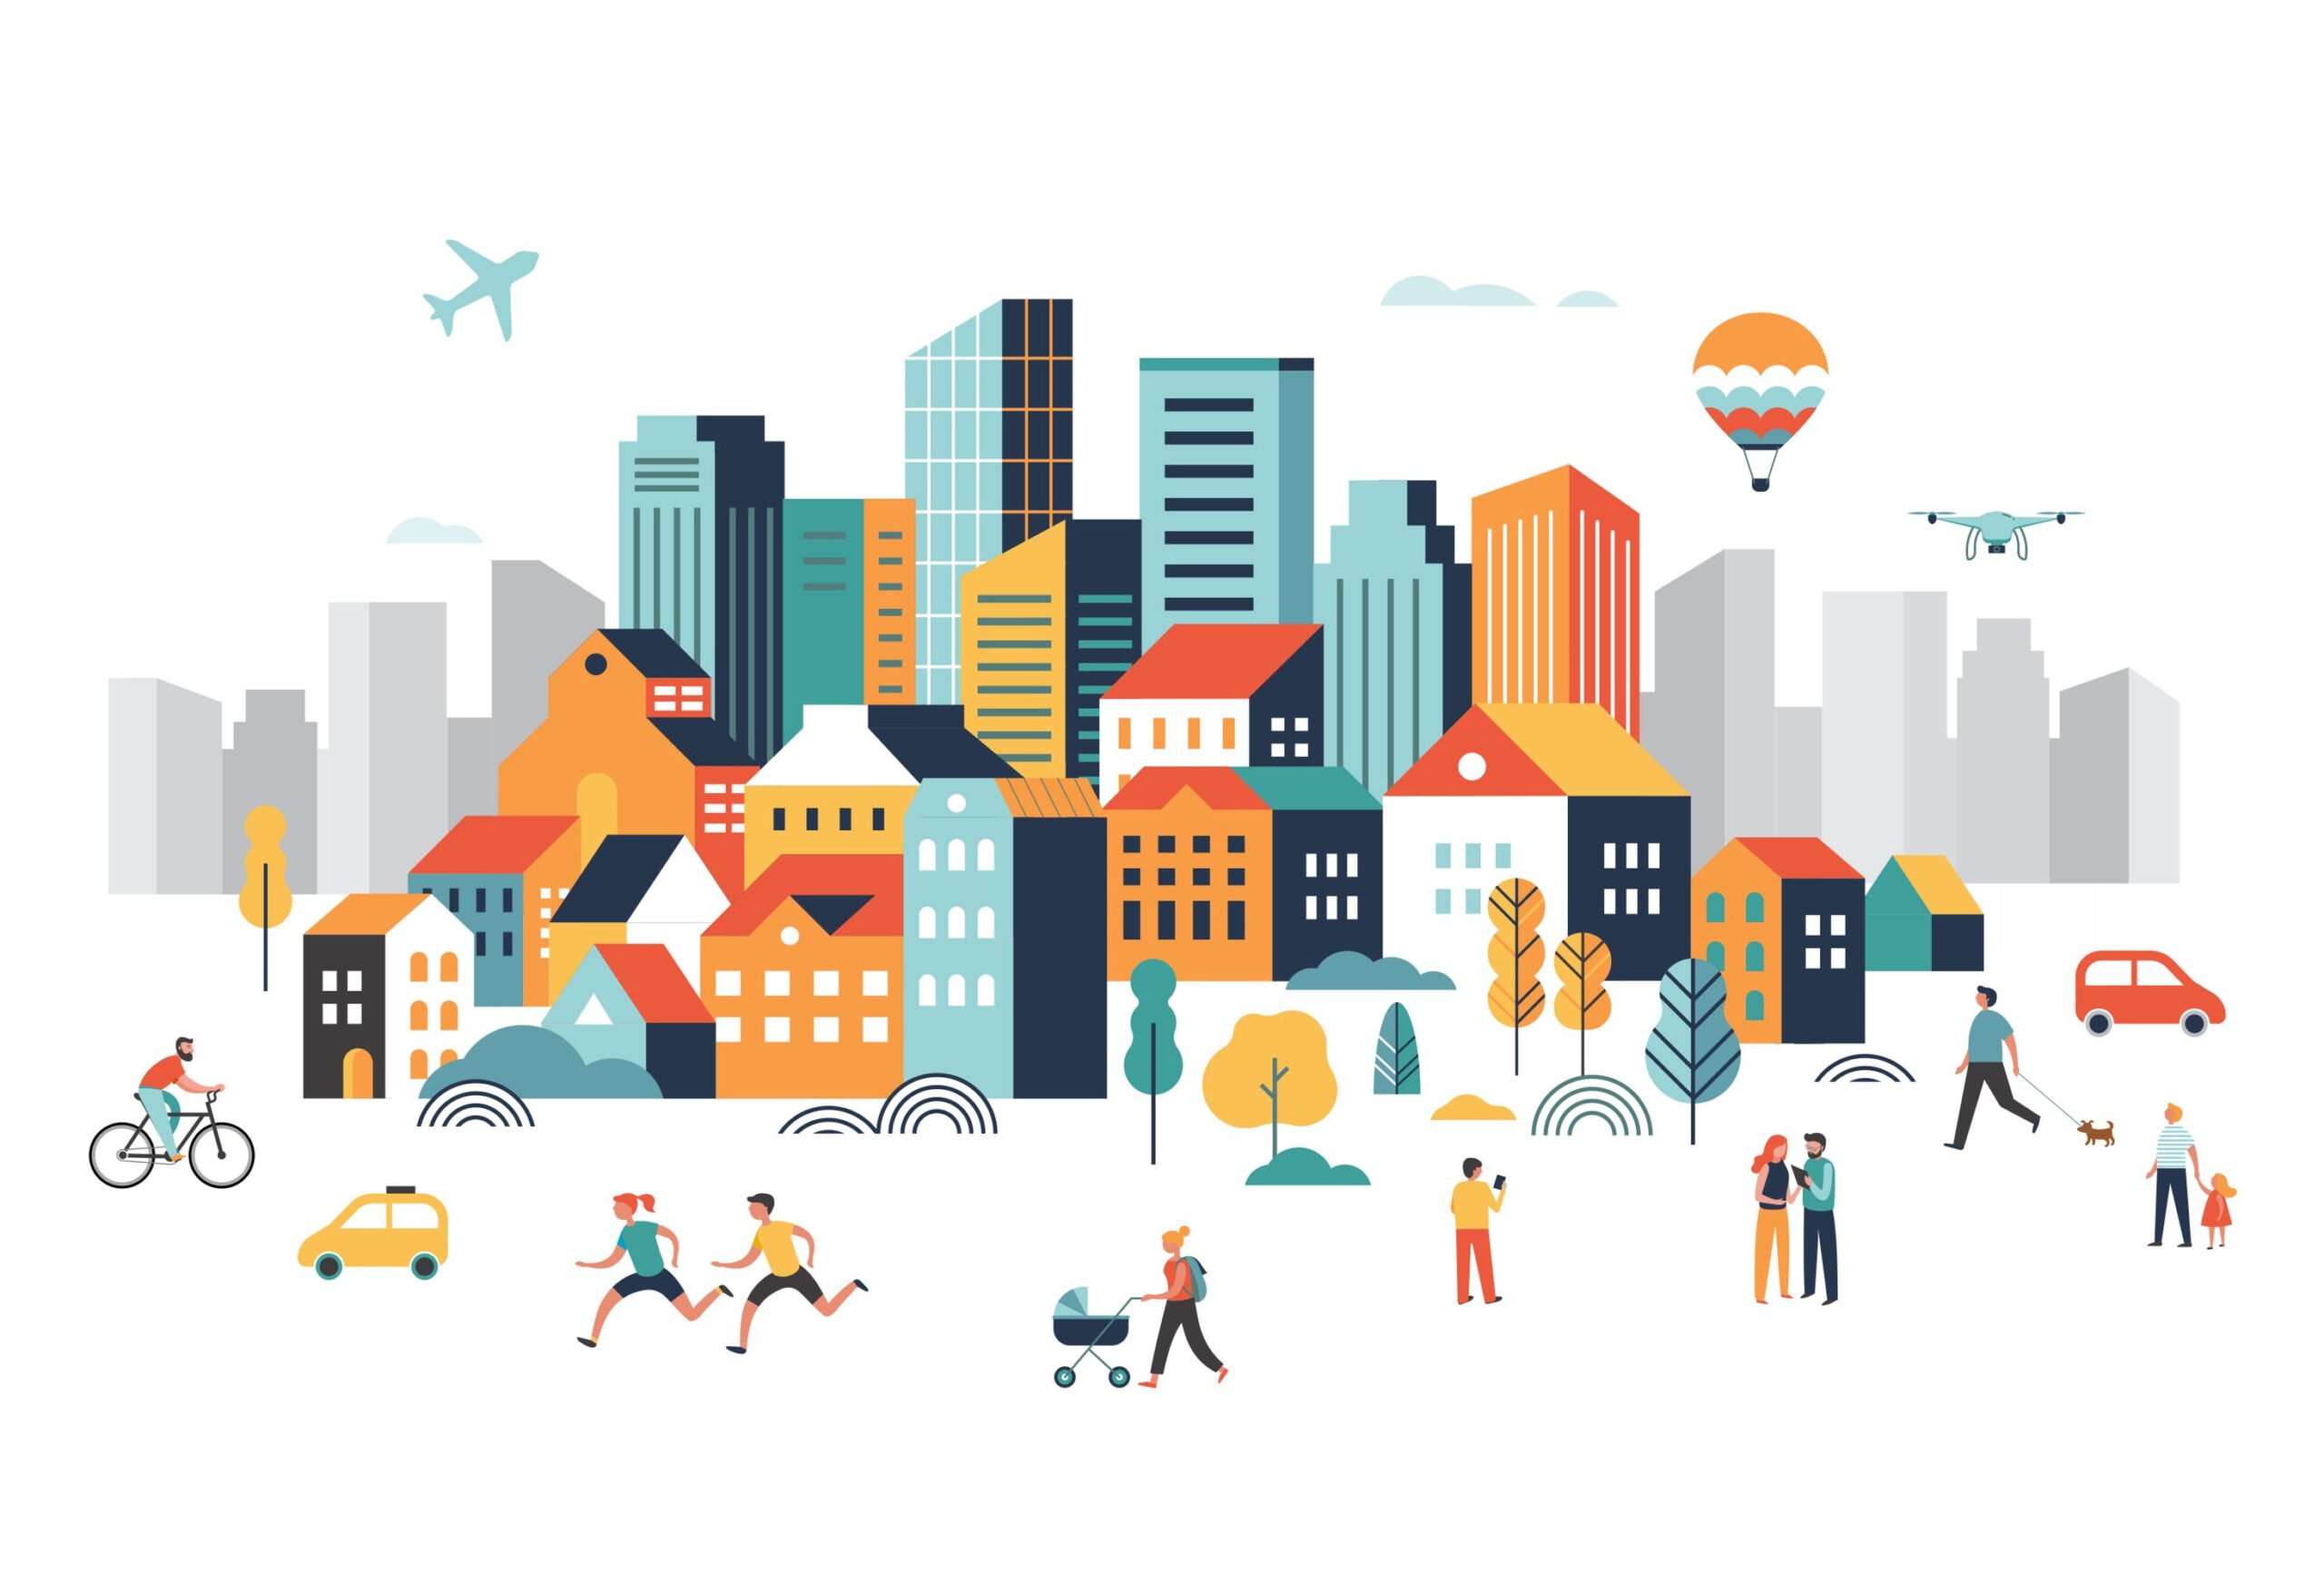 colorful illustration of a vibrant city with people walking, biking, and buildings and trees.